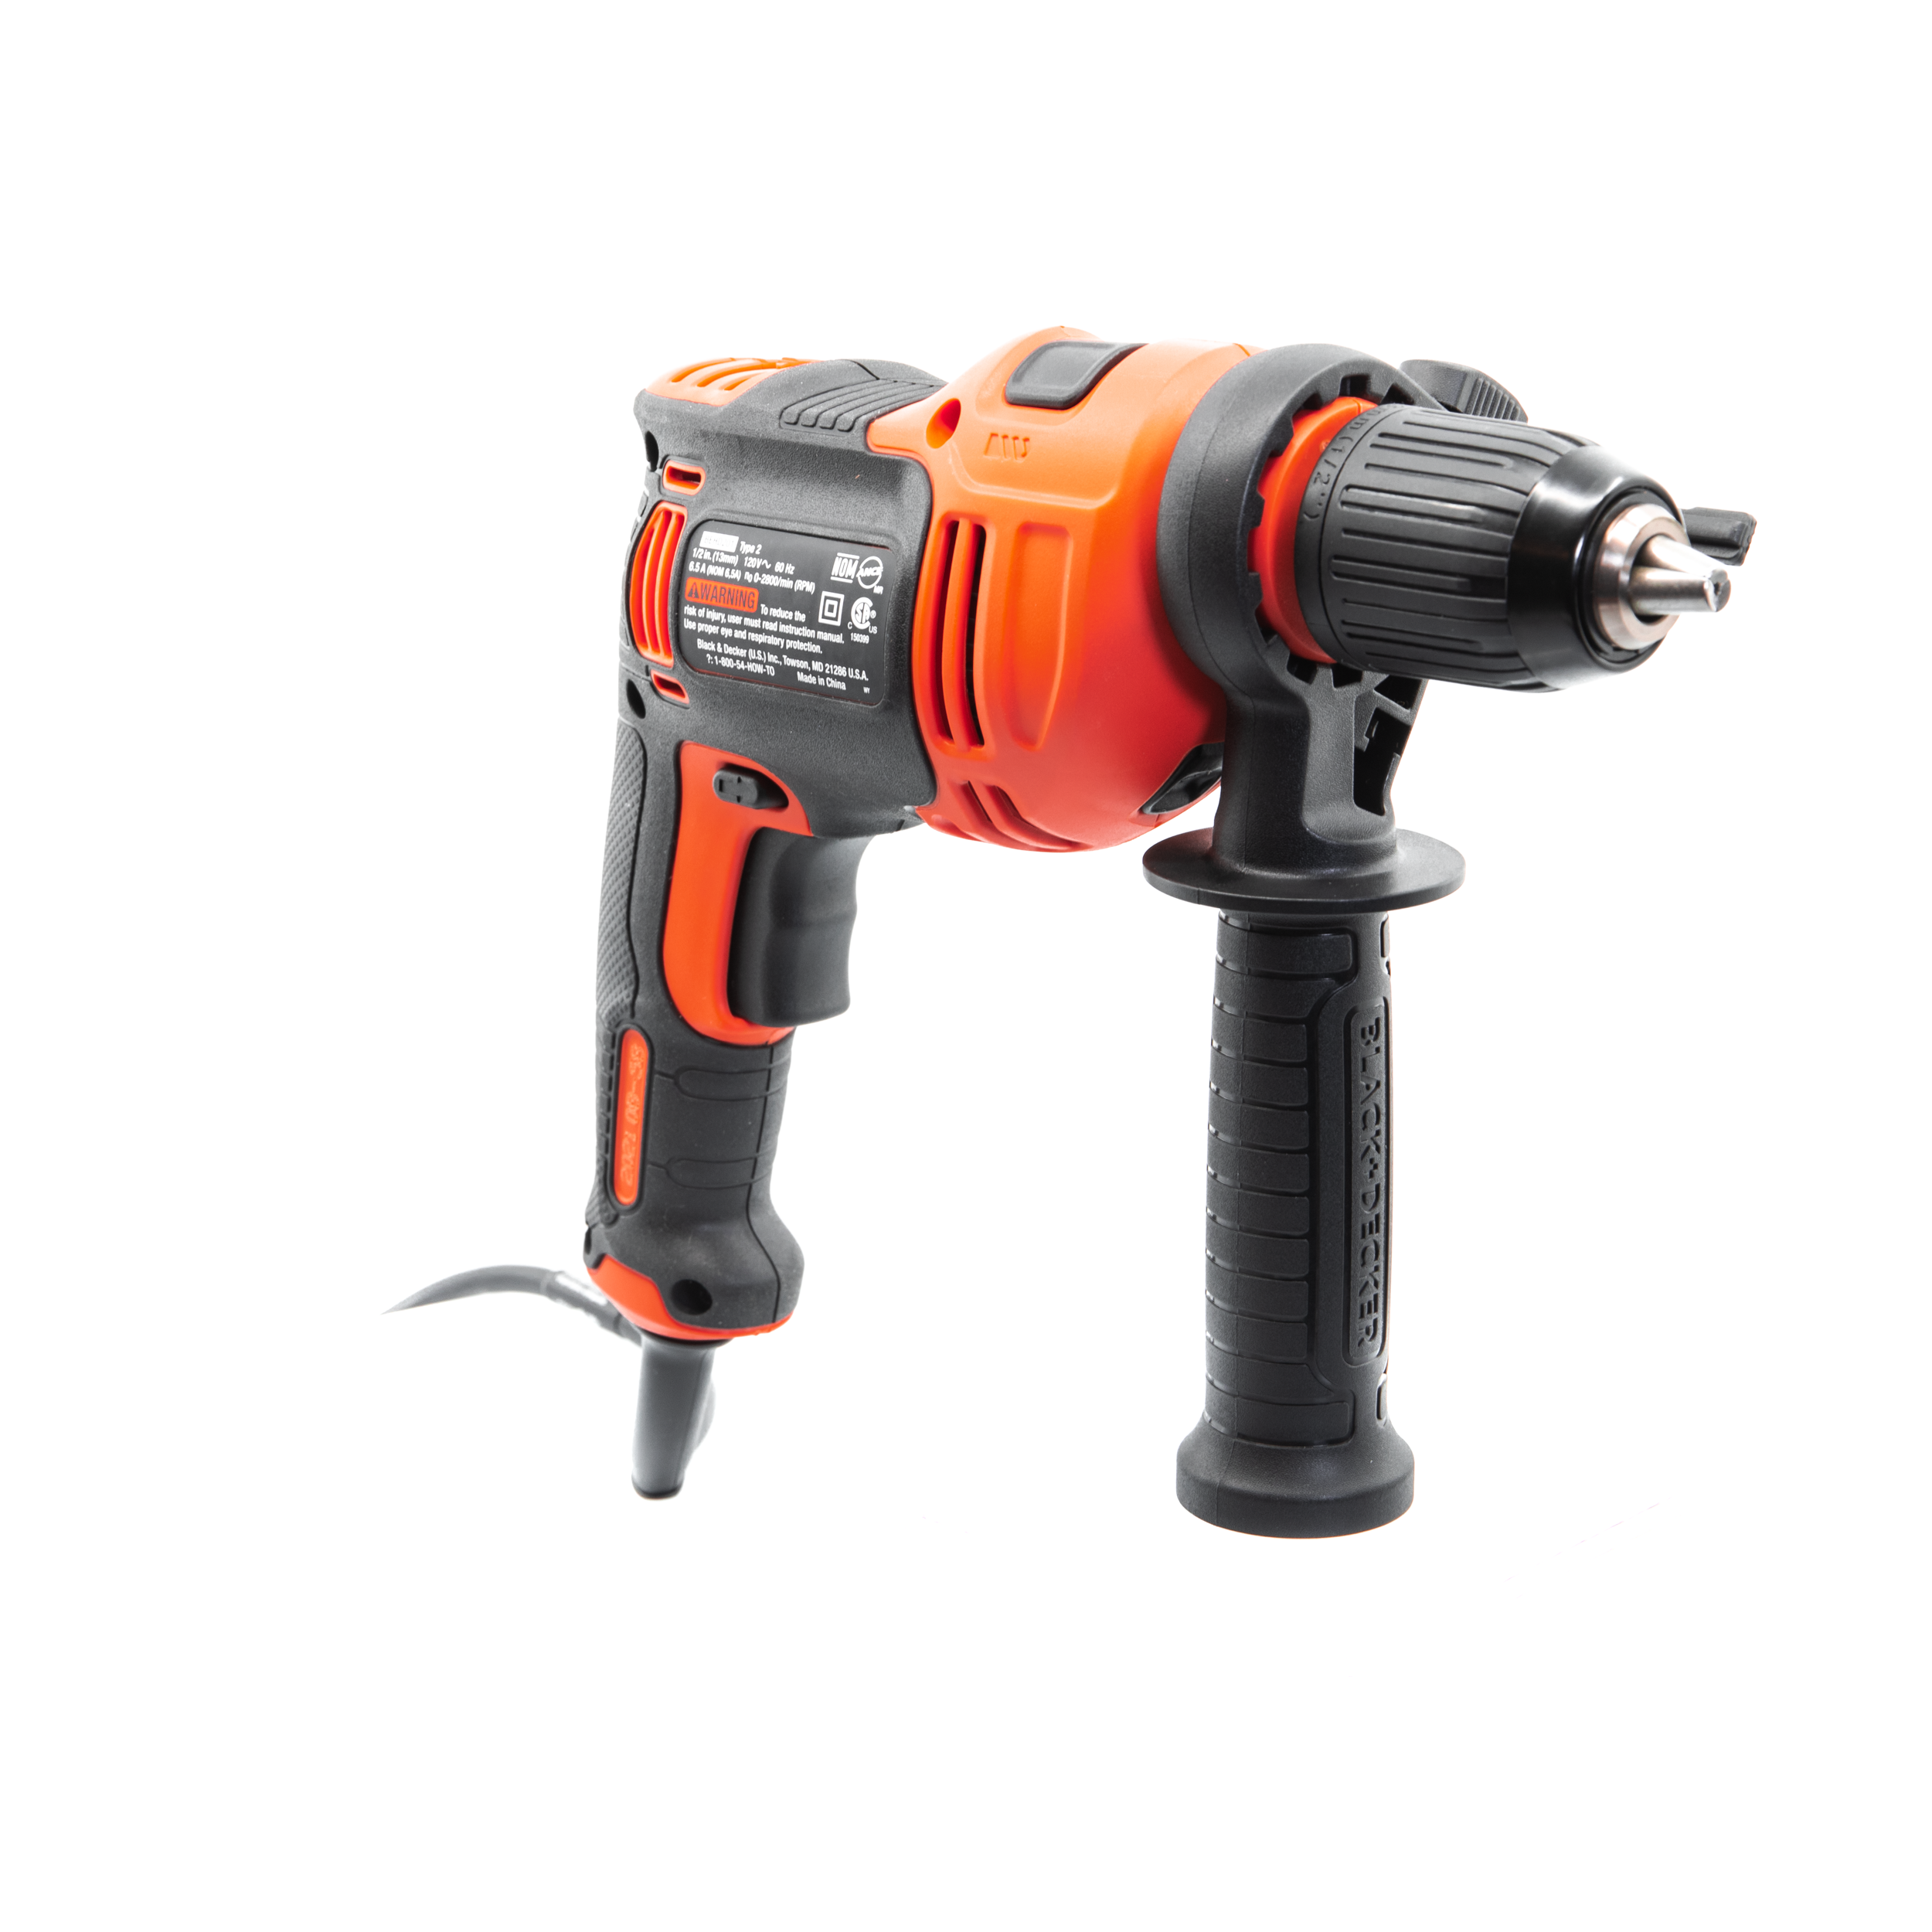 What Do The Settings On A Black & Decker Drill Mean? 